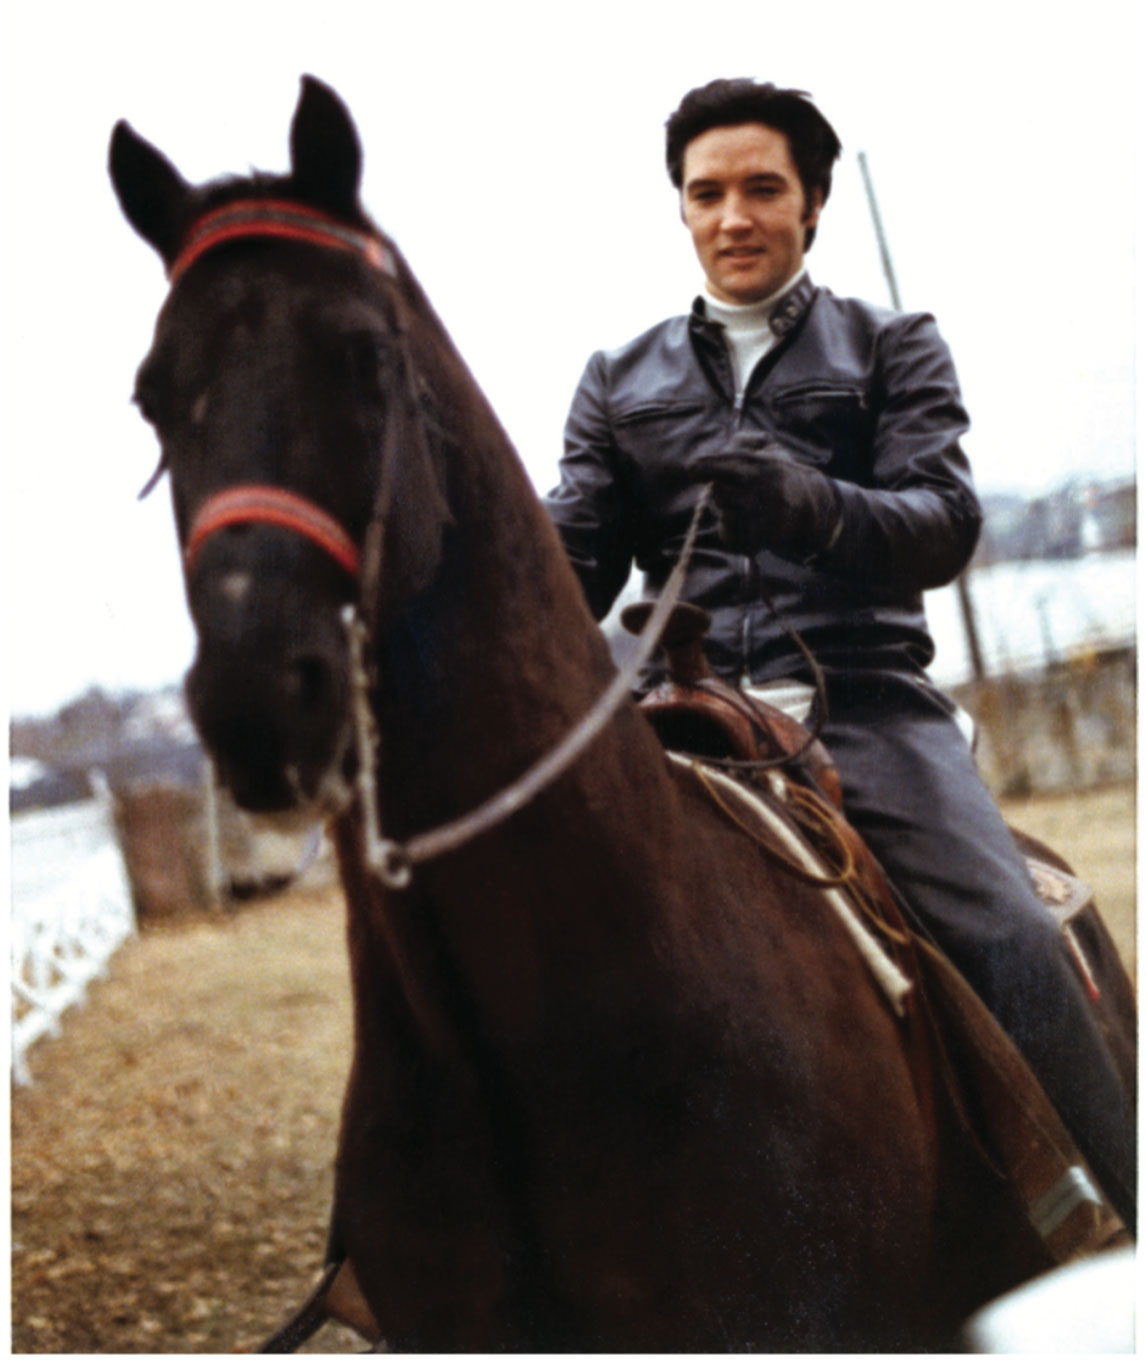 Elvis poses aboard his beloved Tennessee Walking Horse, Bear, in this candid photograph taken on January 1, 1968. © Magma Agency / Wireimage / Getty Images.